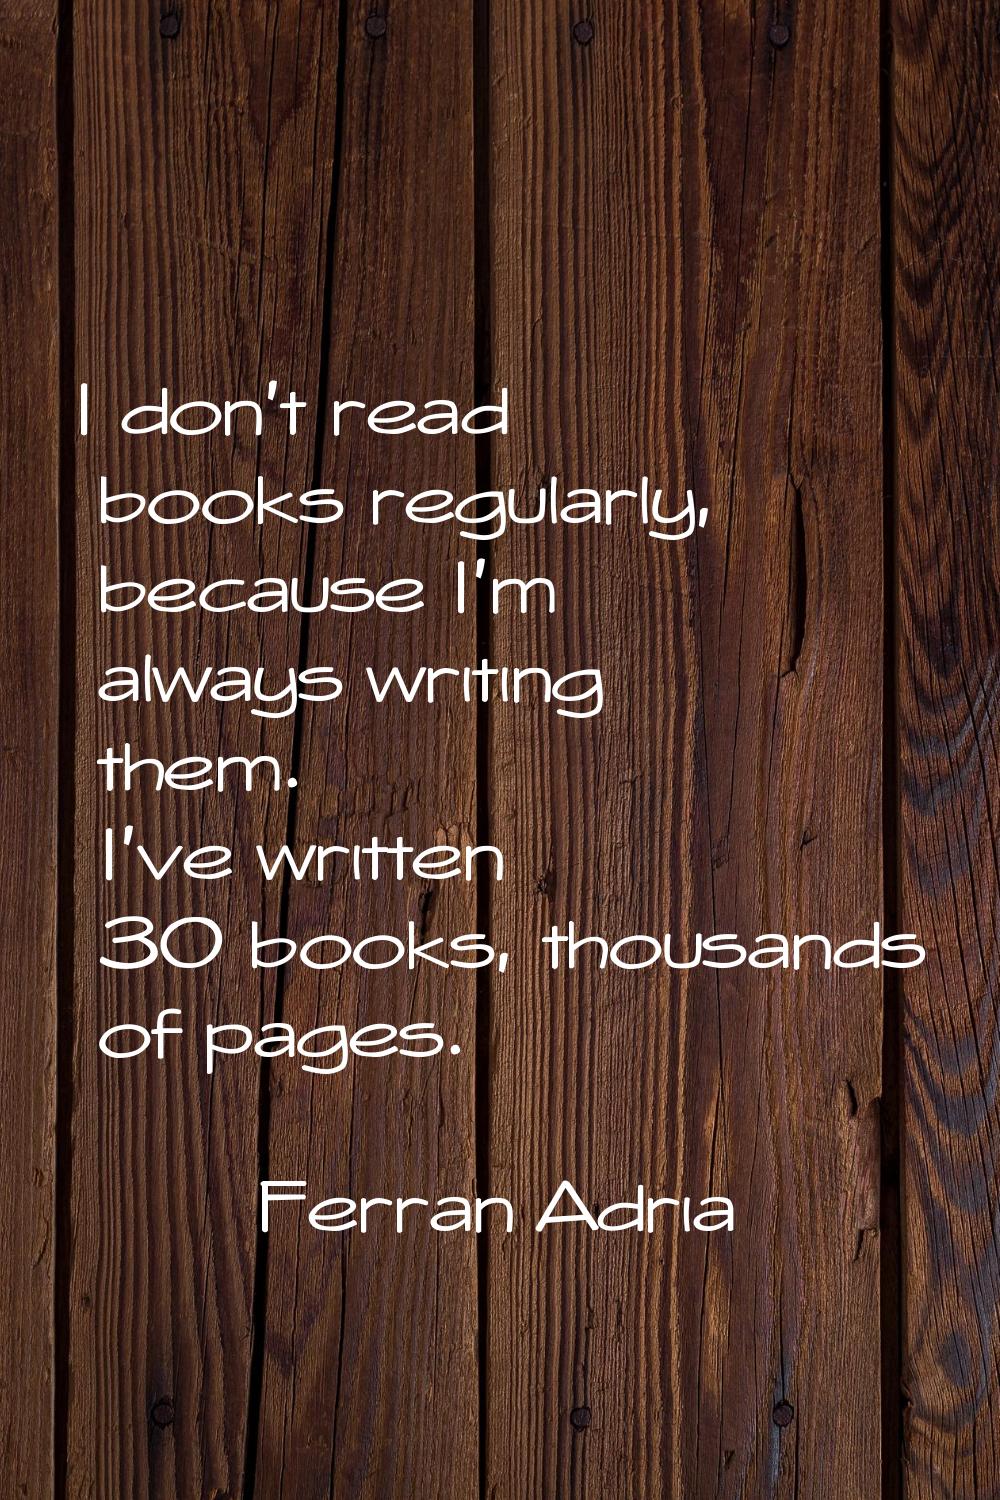 I don't read books regularly, because I'm always writing them. I've written 30 books, thousands of 